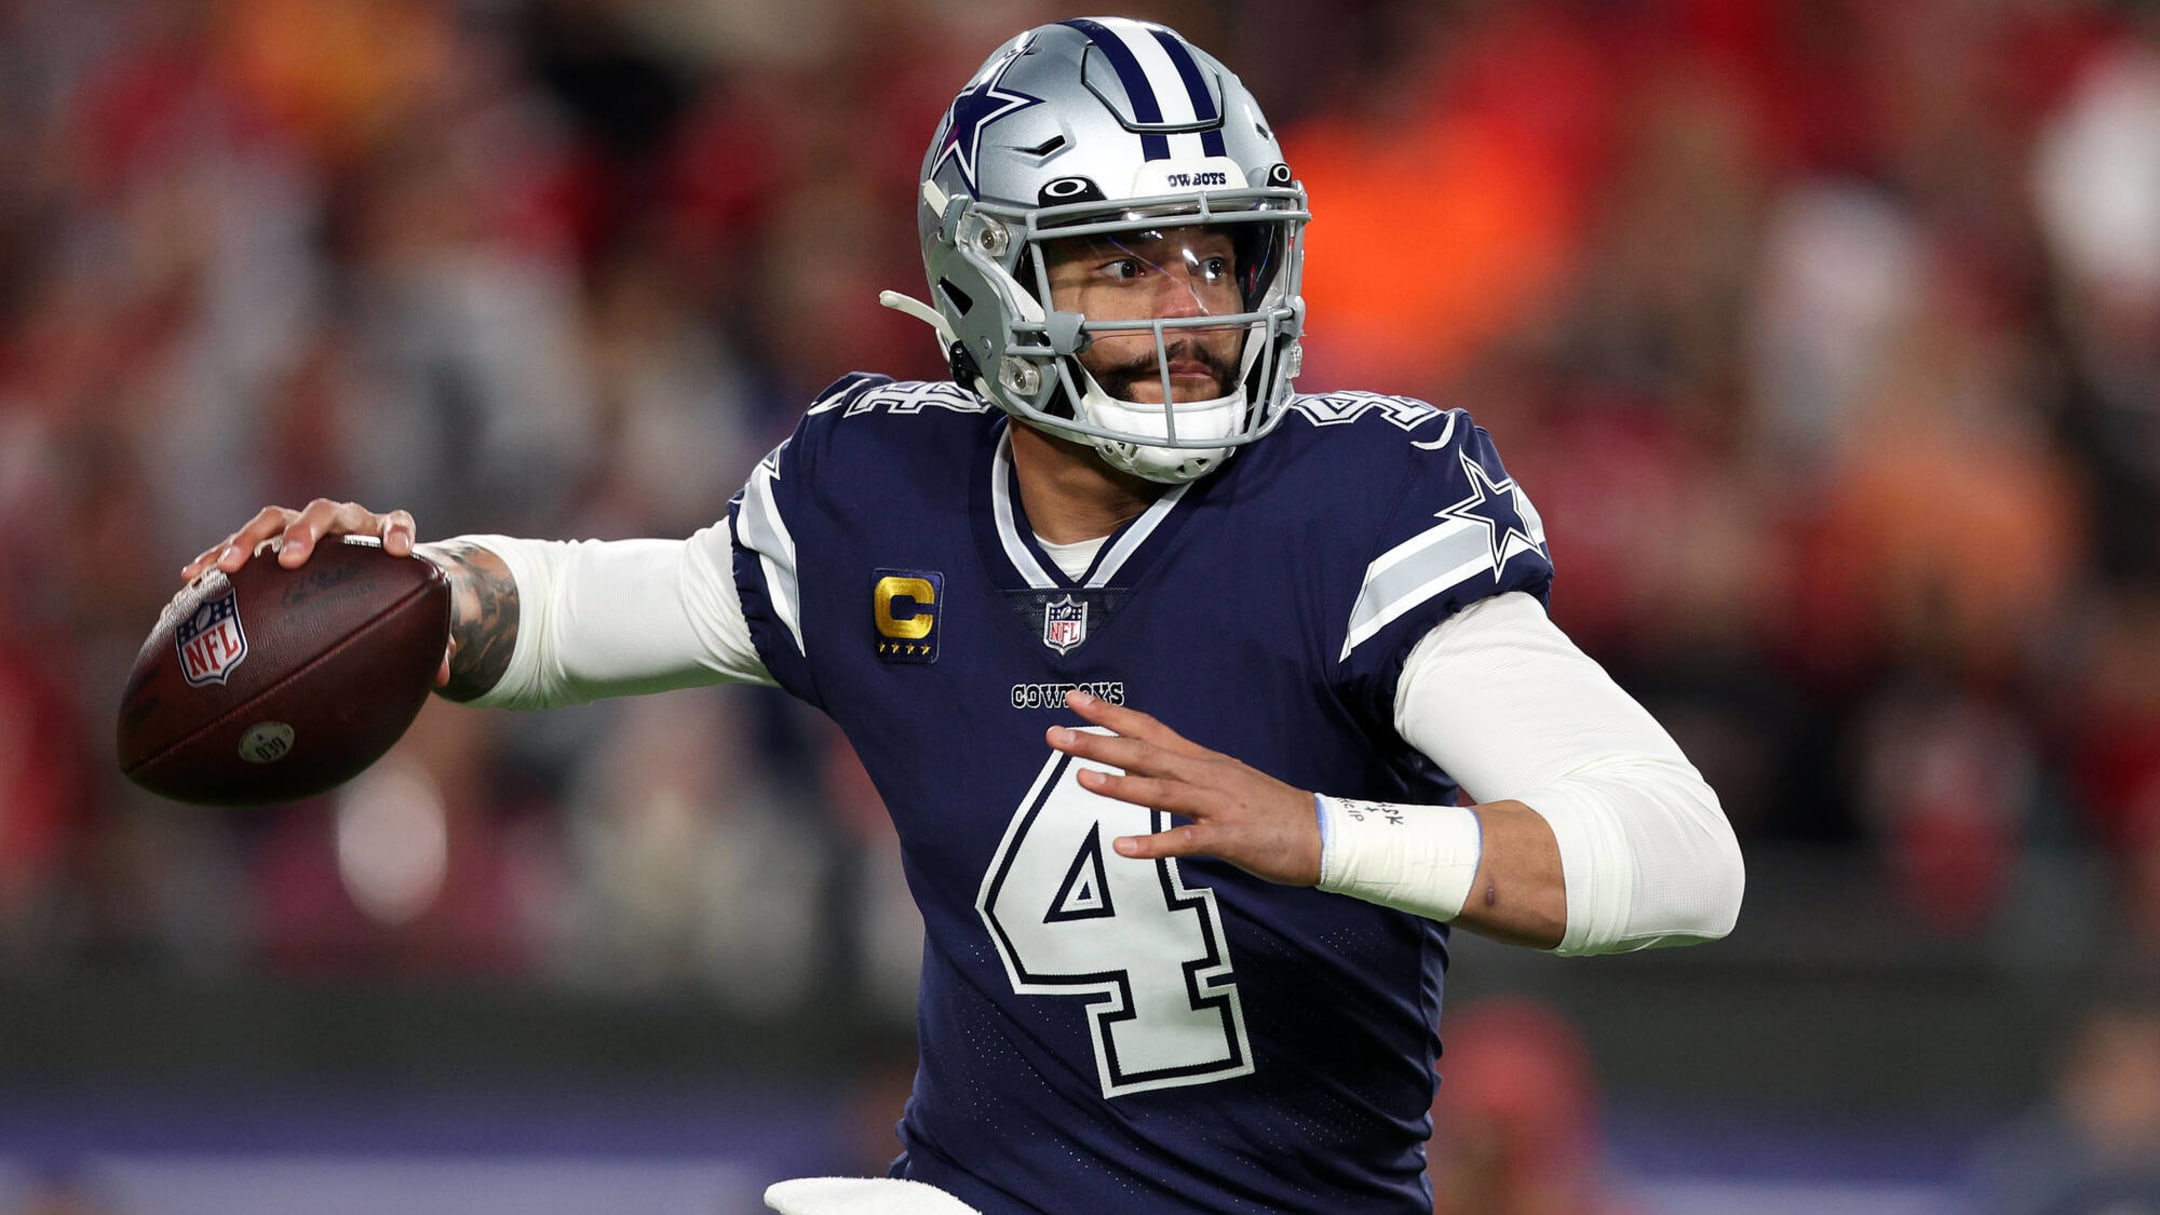 NFL futures, 2 Dallas Cowboys bets: Can Dallas turn it around?